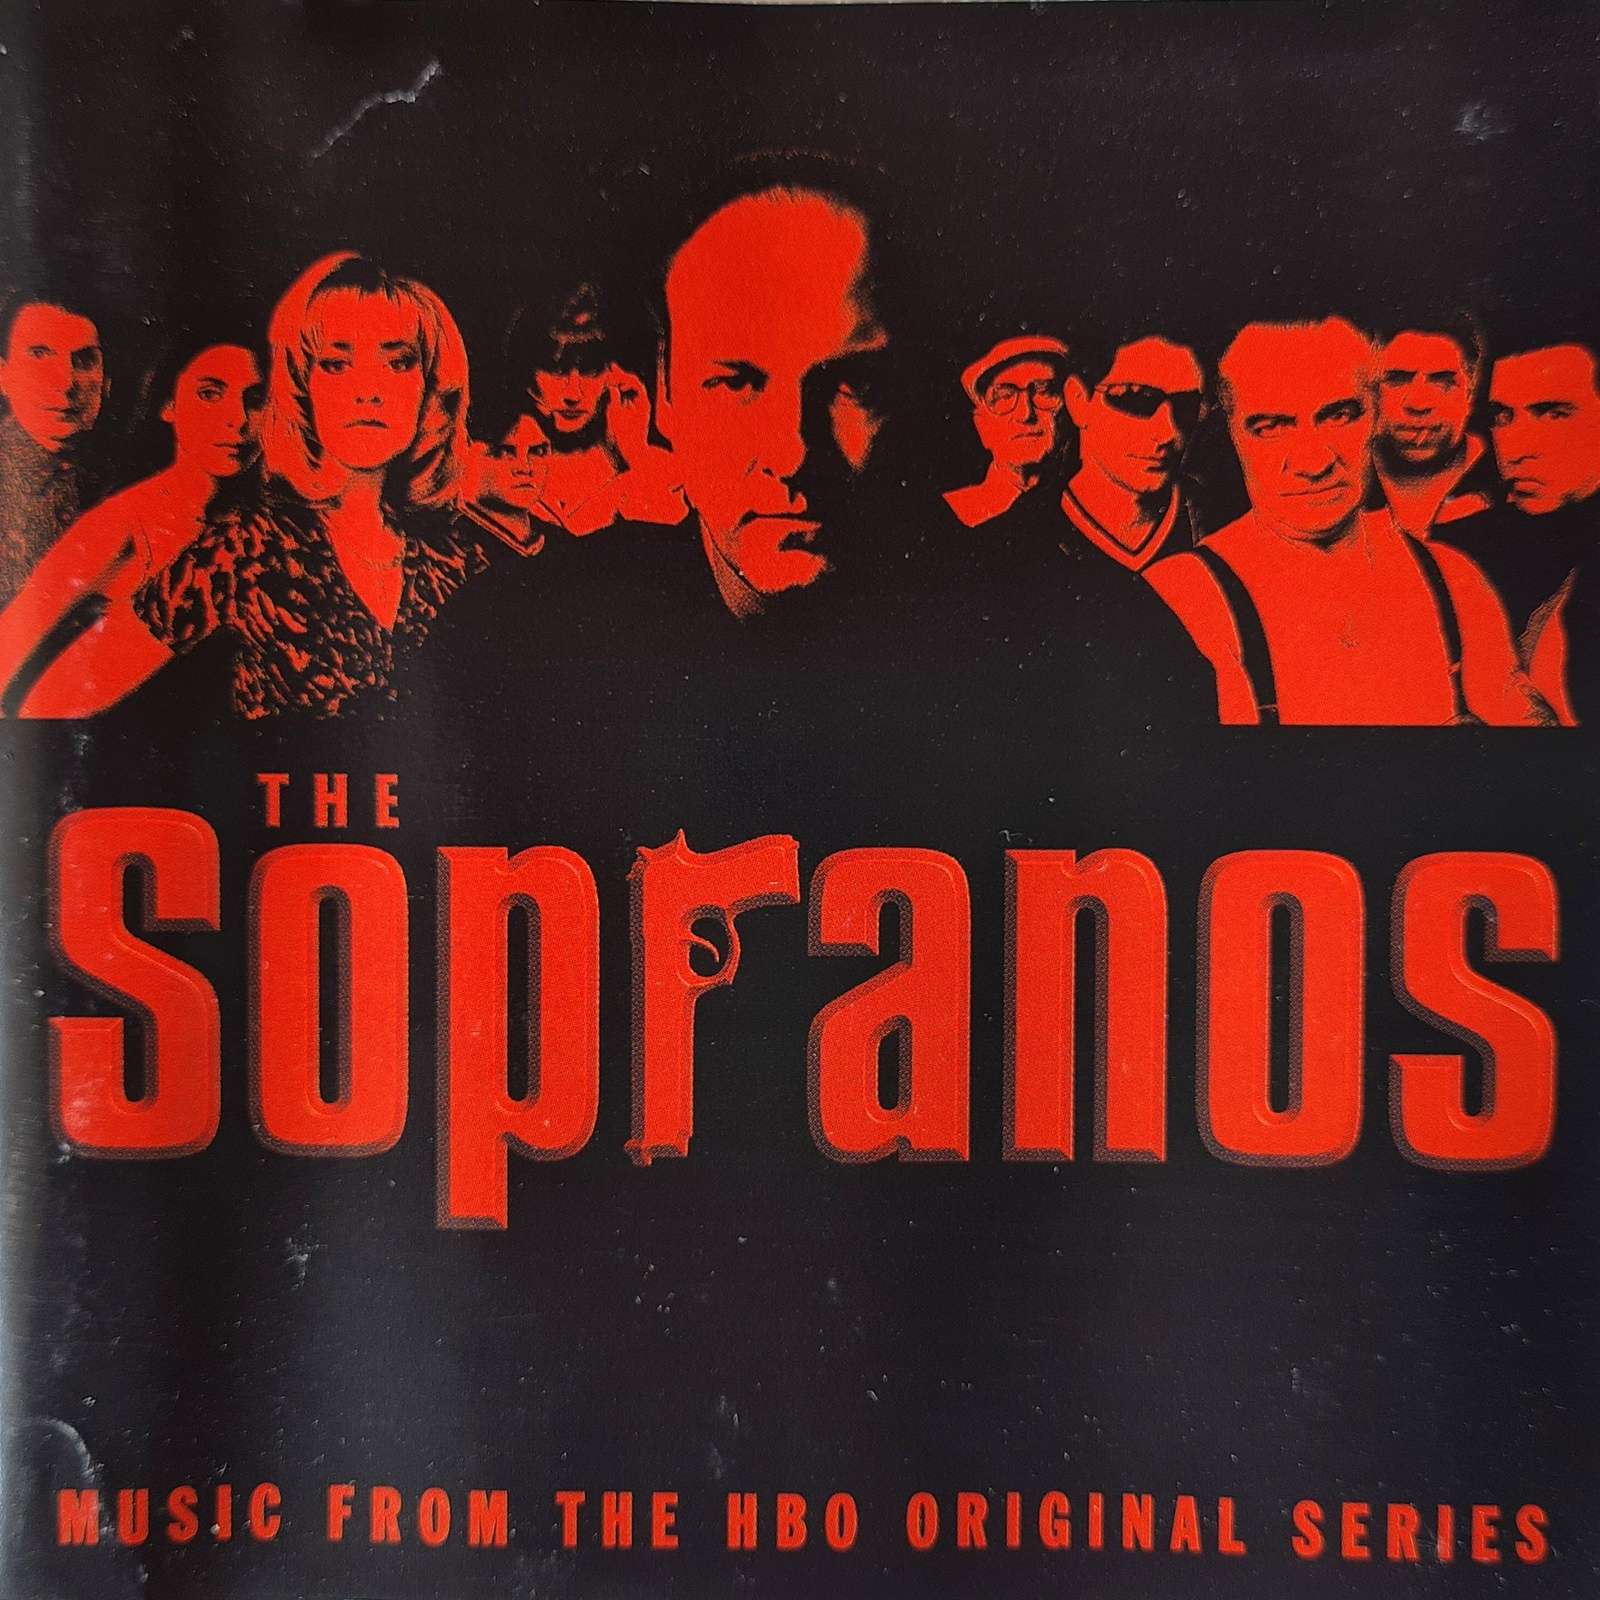 The Sopranos - Music from the HBO Original Series (CD)